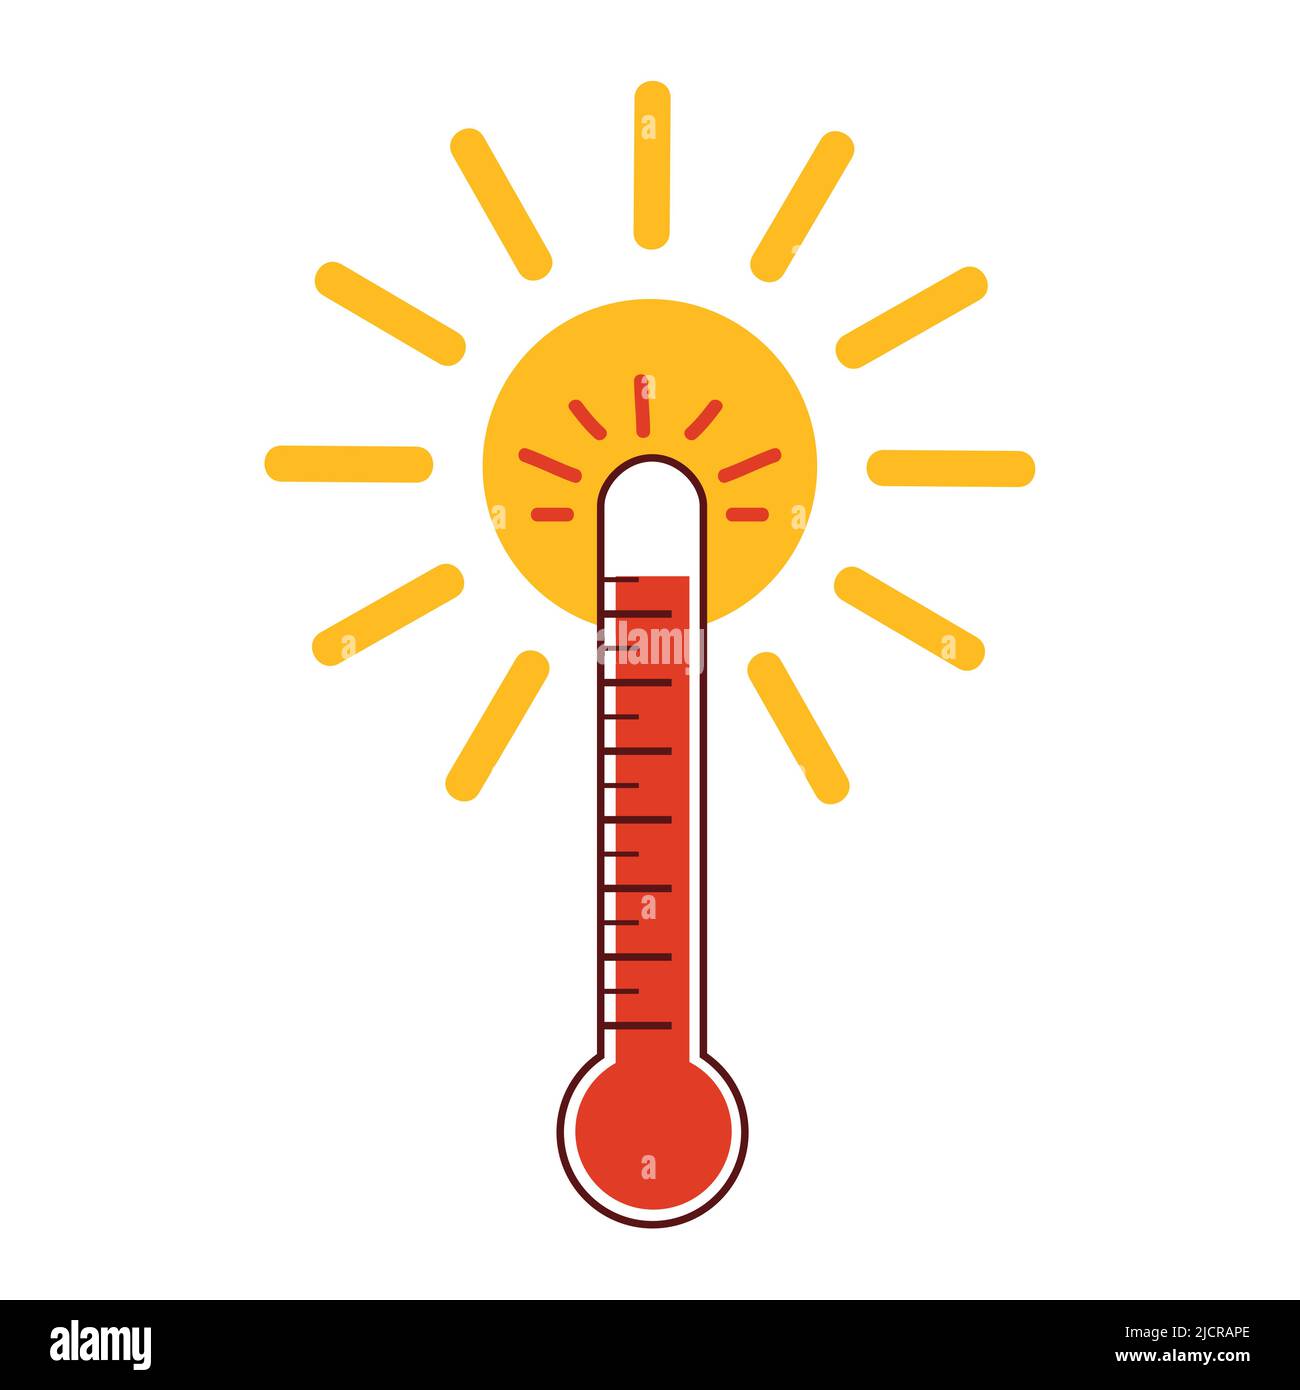 heat thermometer icon and sun symbol vector illustration EPS10 Stock Vector  Image & Art - Alamy